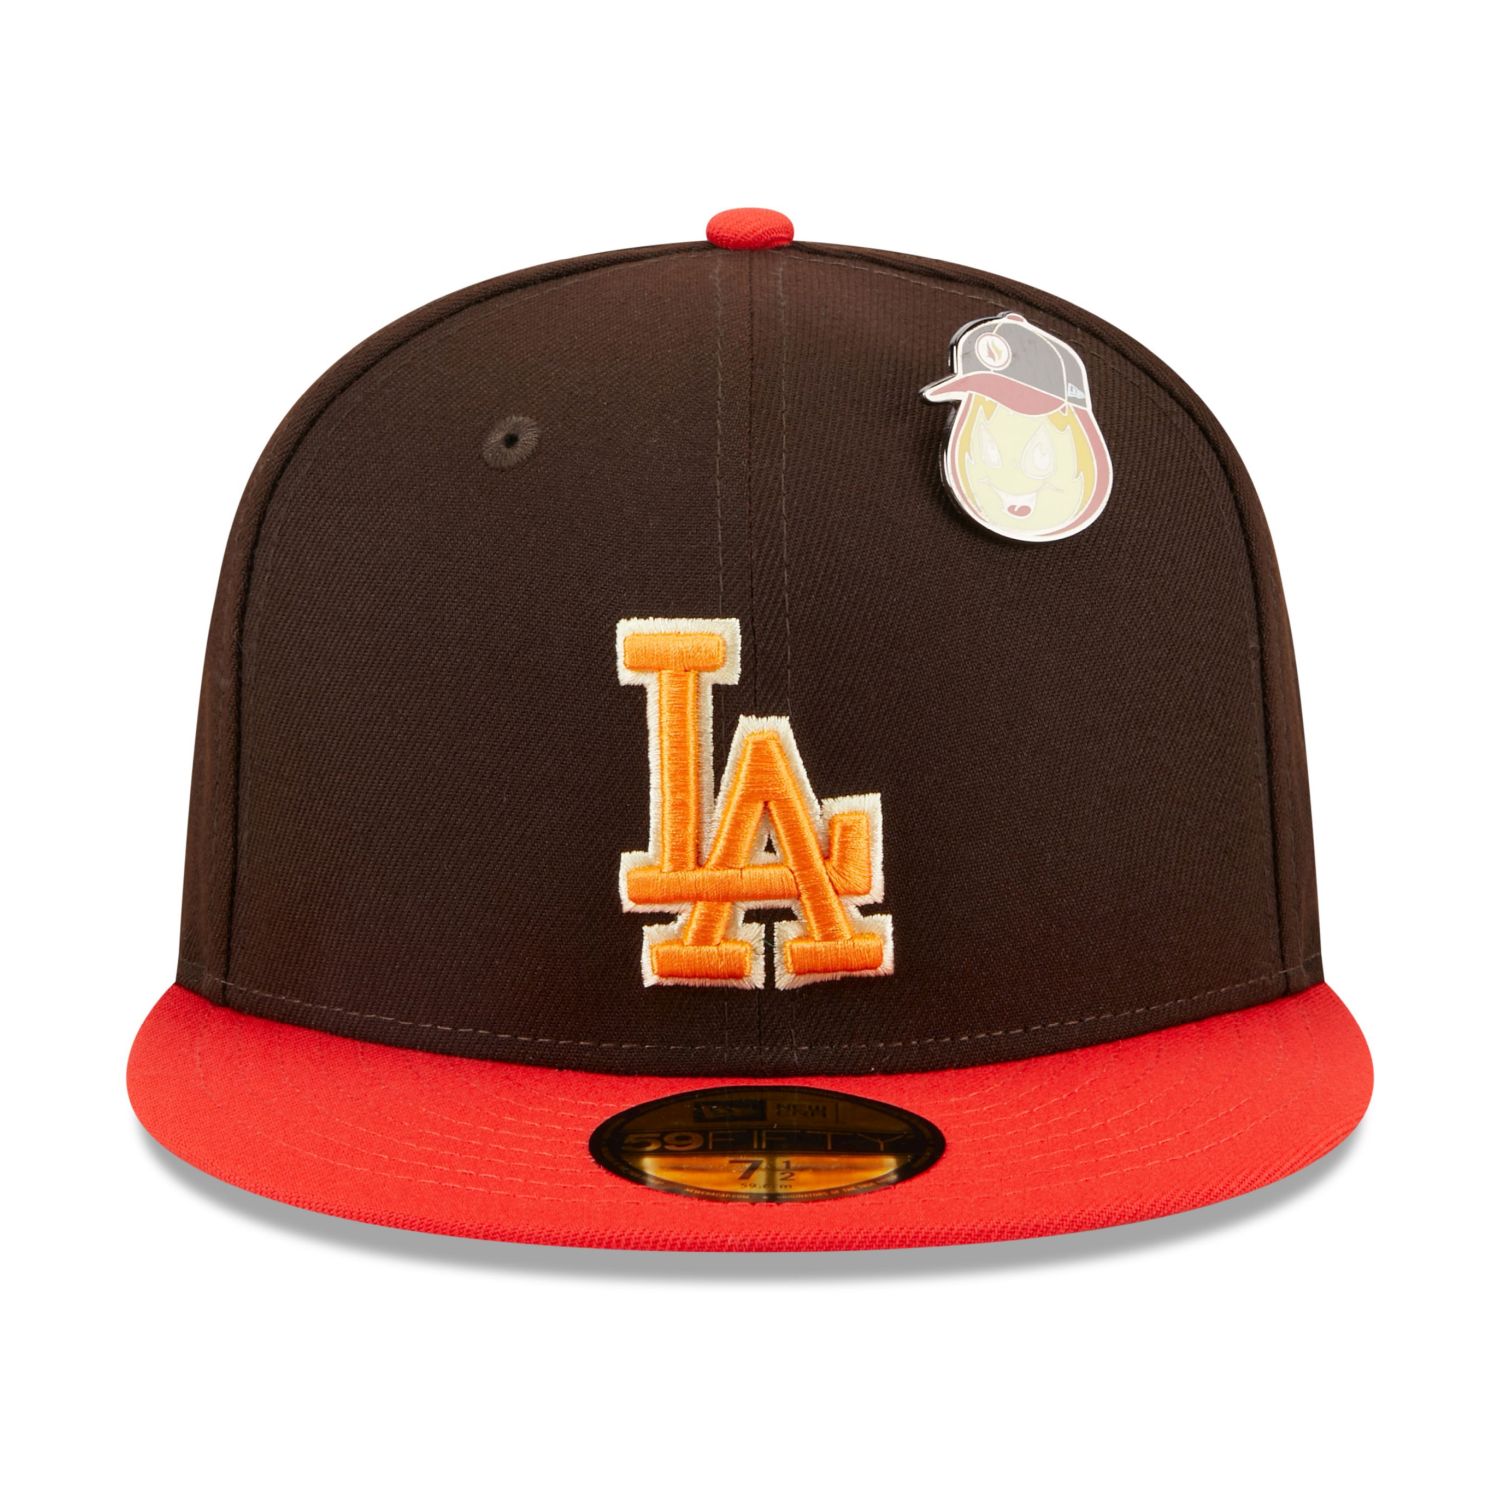 New Era Flat Brim 59FIFTY The Elements Water Pin Los Angeles